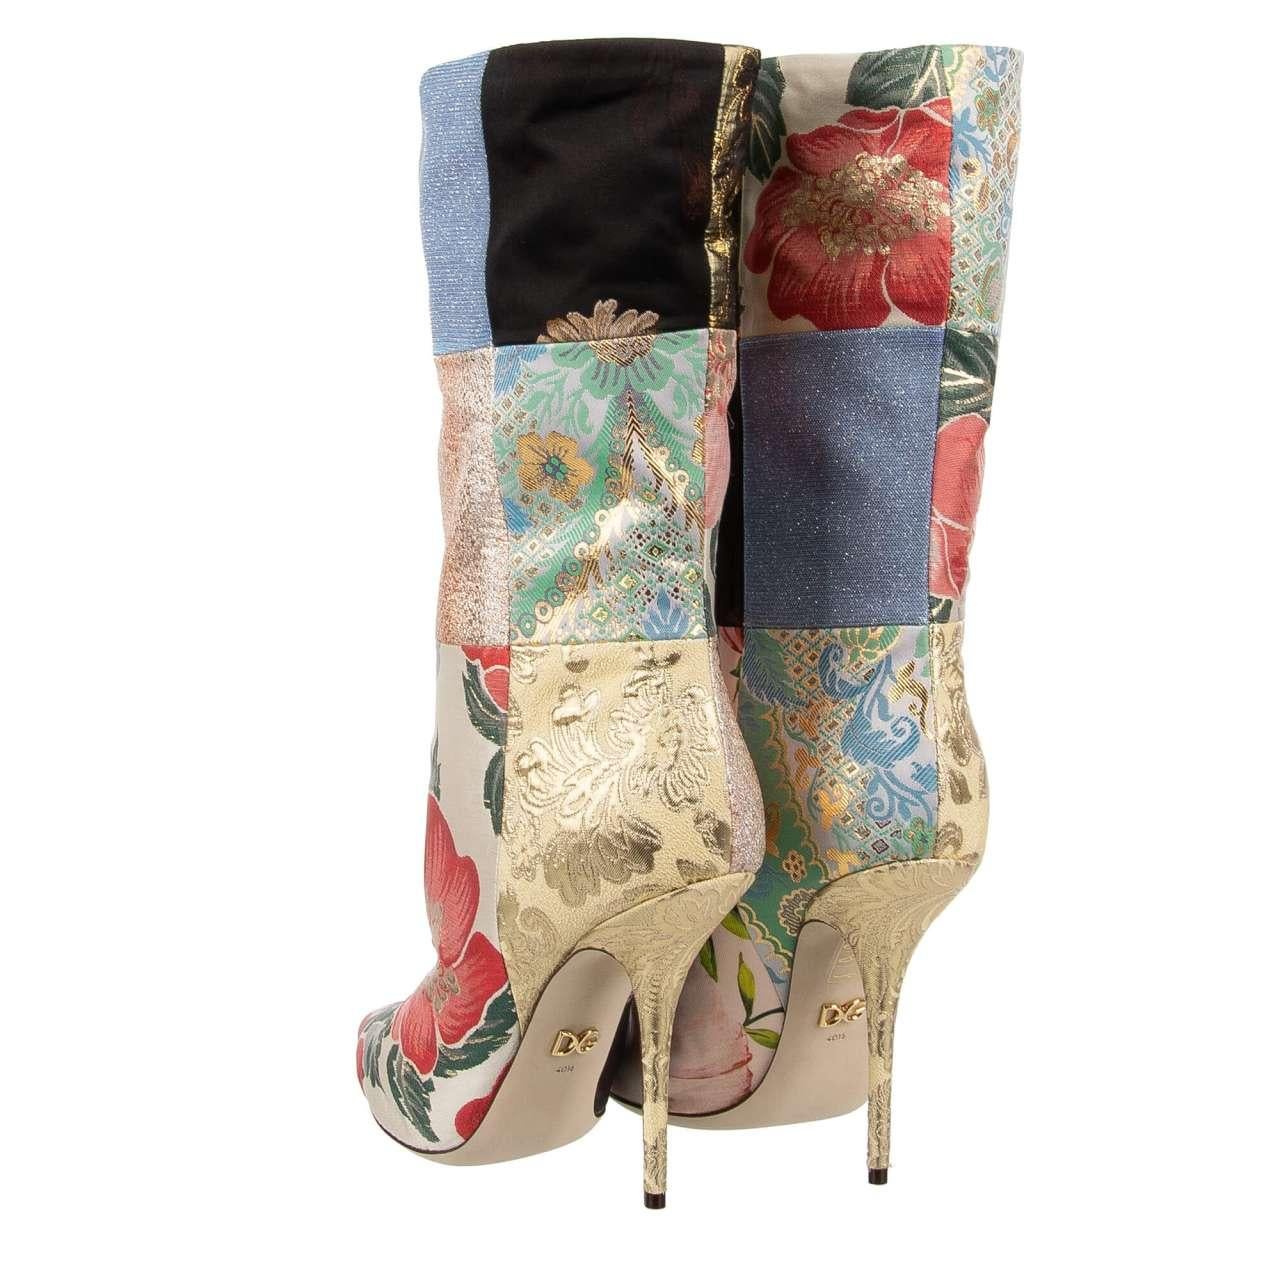 Dolce & Gabbana Flower Brocade Patchwork Boots CARDINALE Gold Pink 40.5 10.5 For Sale 1